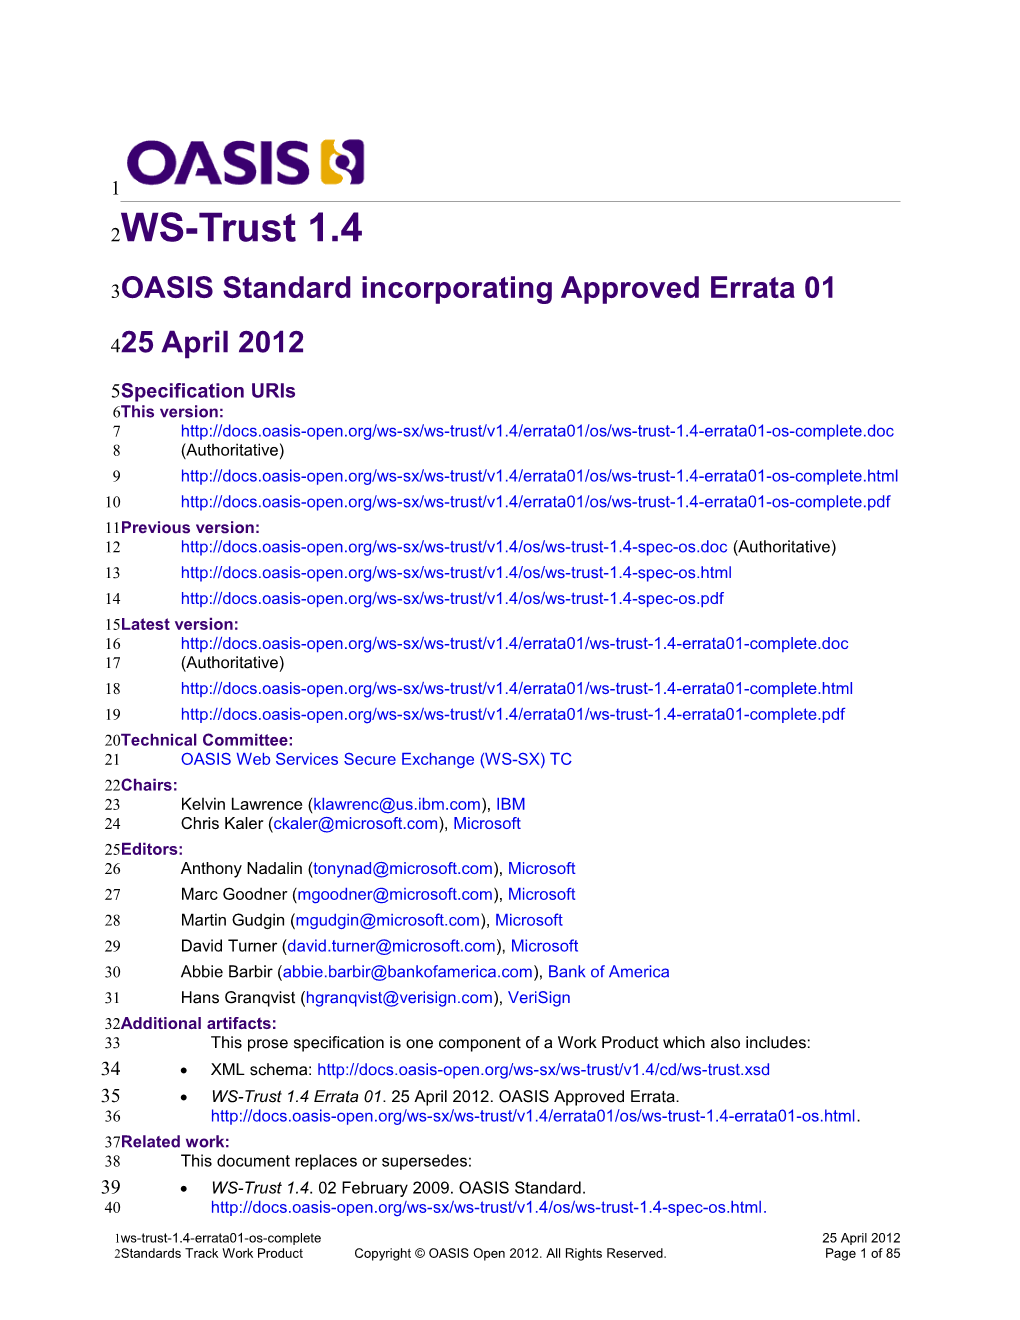 OASIS Standard Incorporating Approved Errata 01